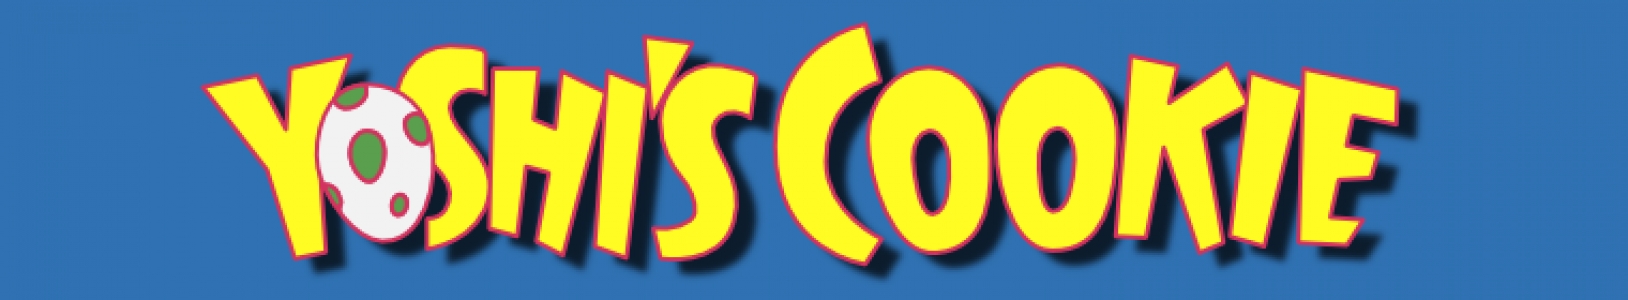 Yoshi's Cookie banner